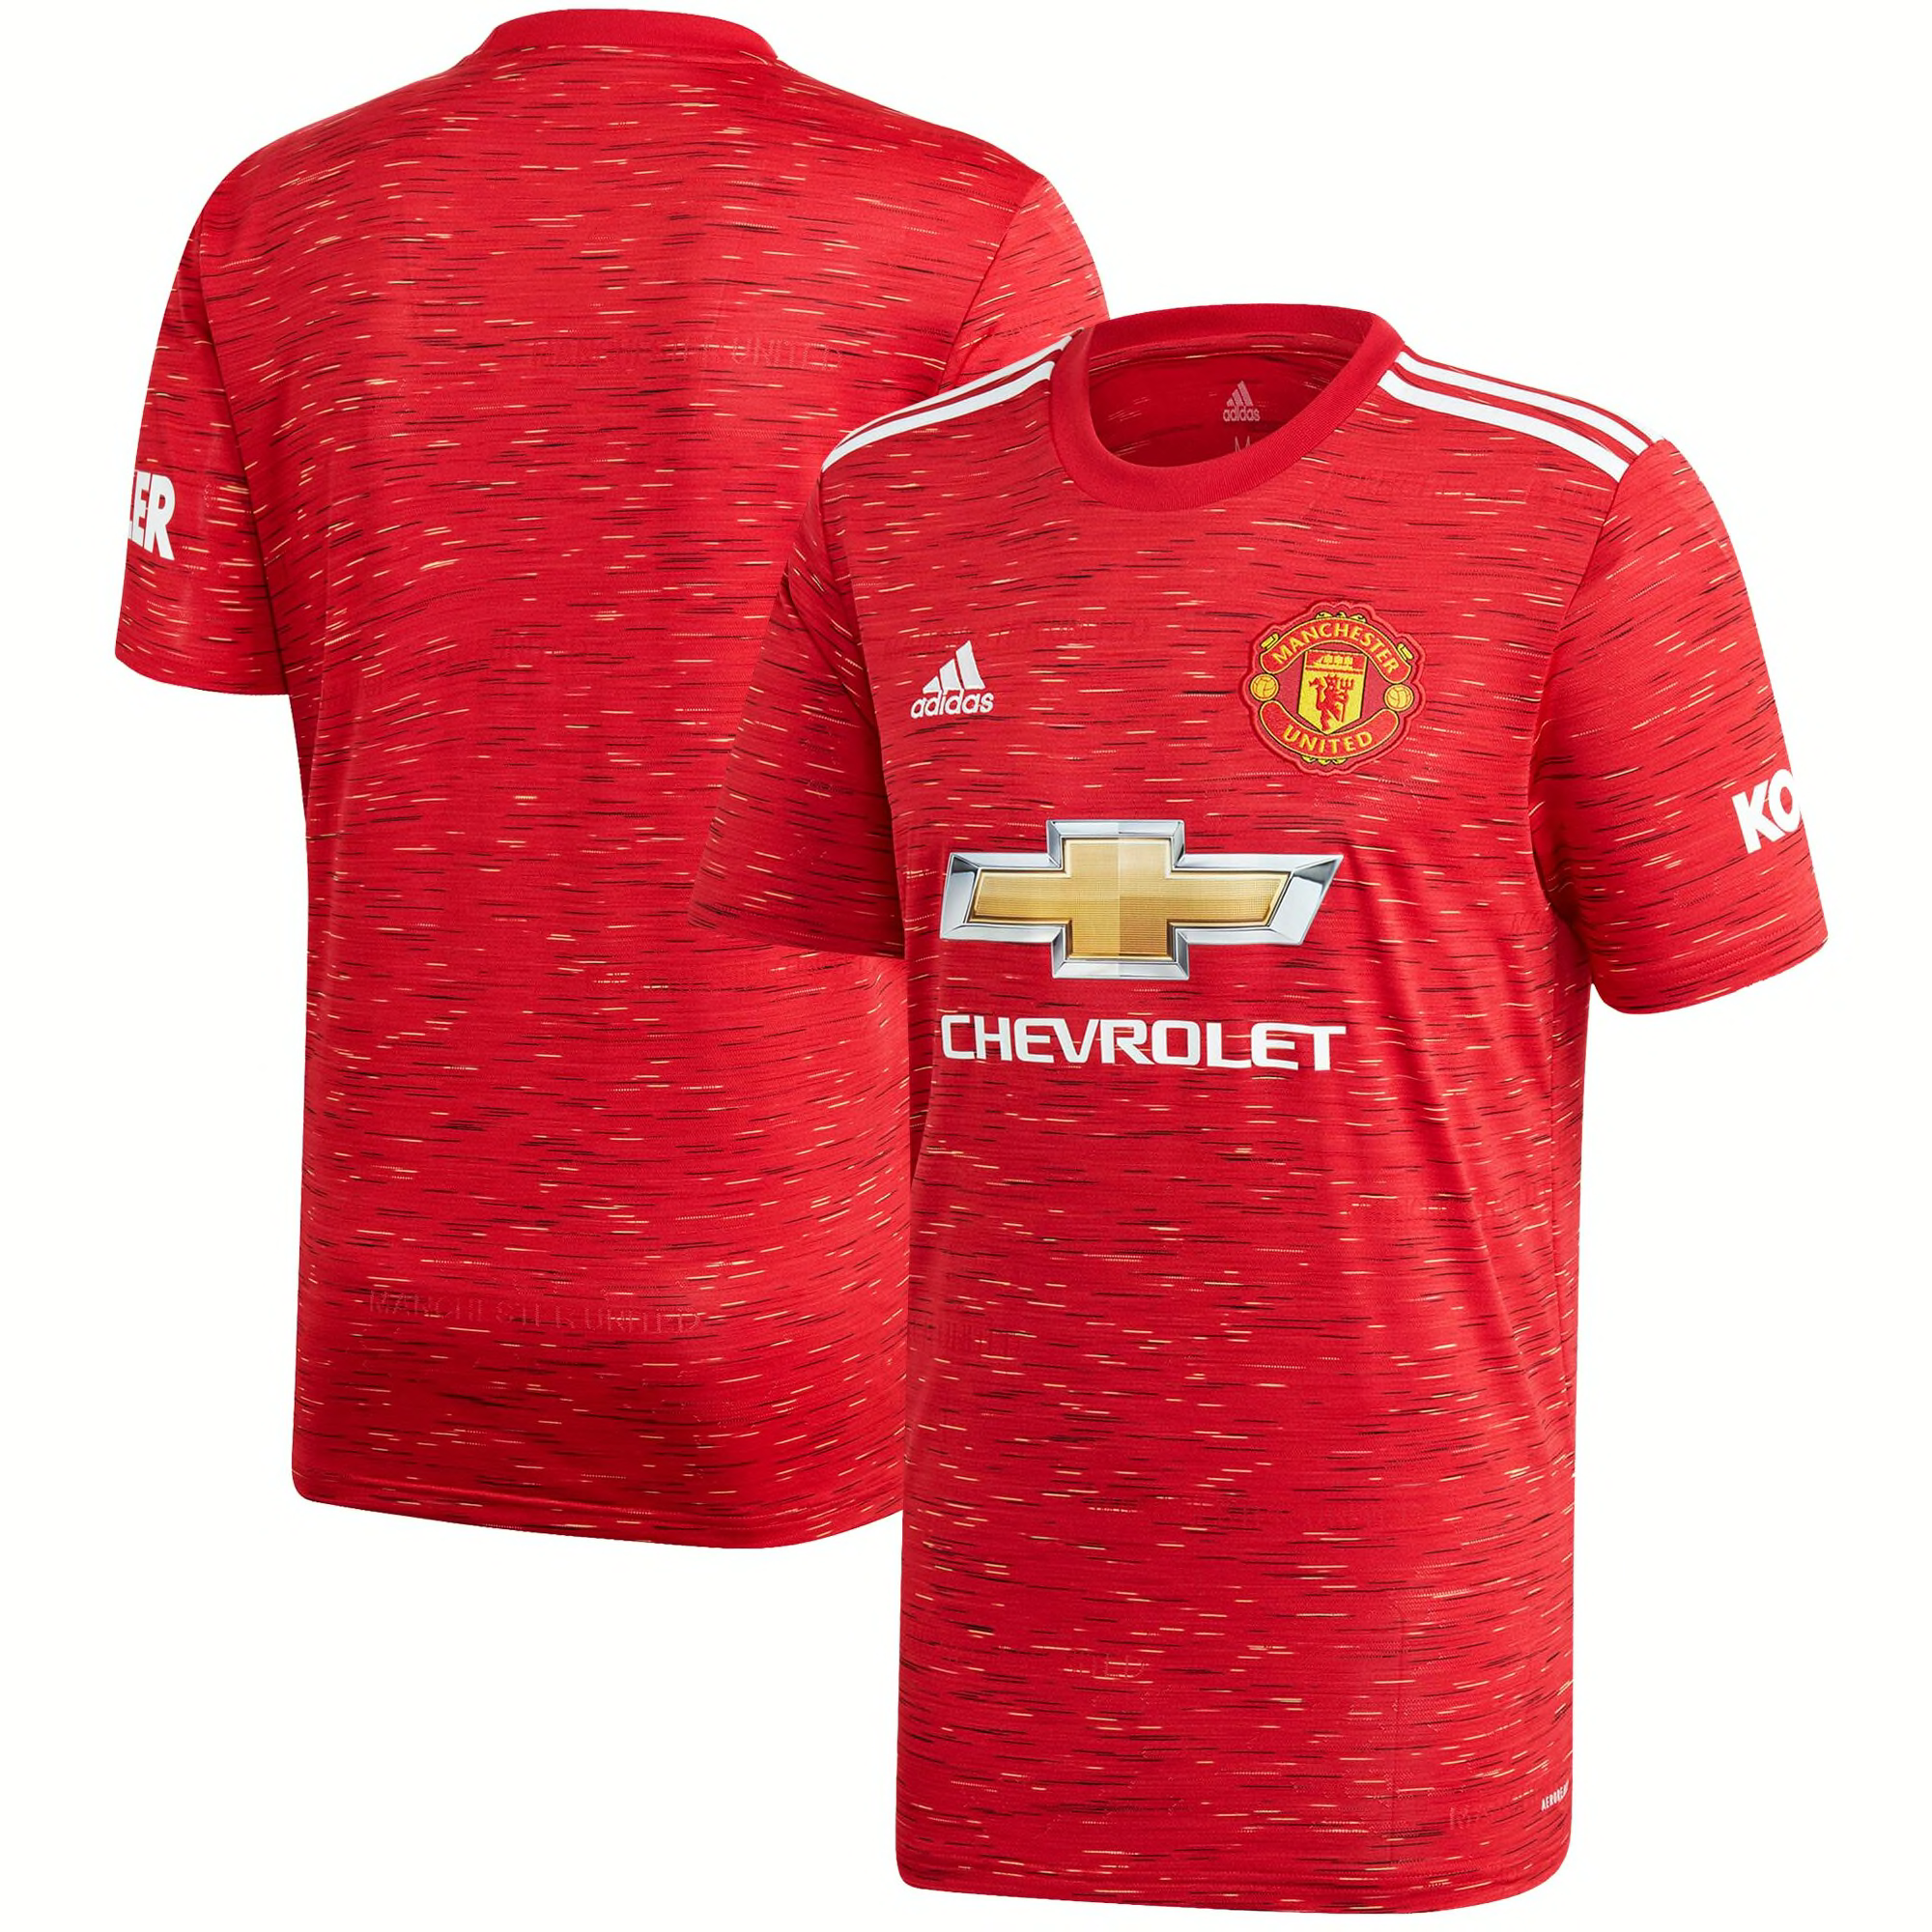 Amazing holiday gifts for the Manchester United fanatic